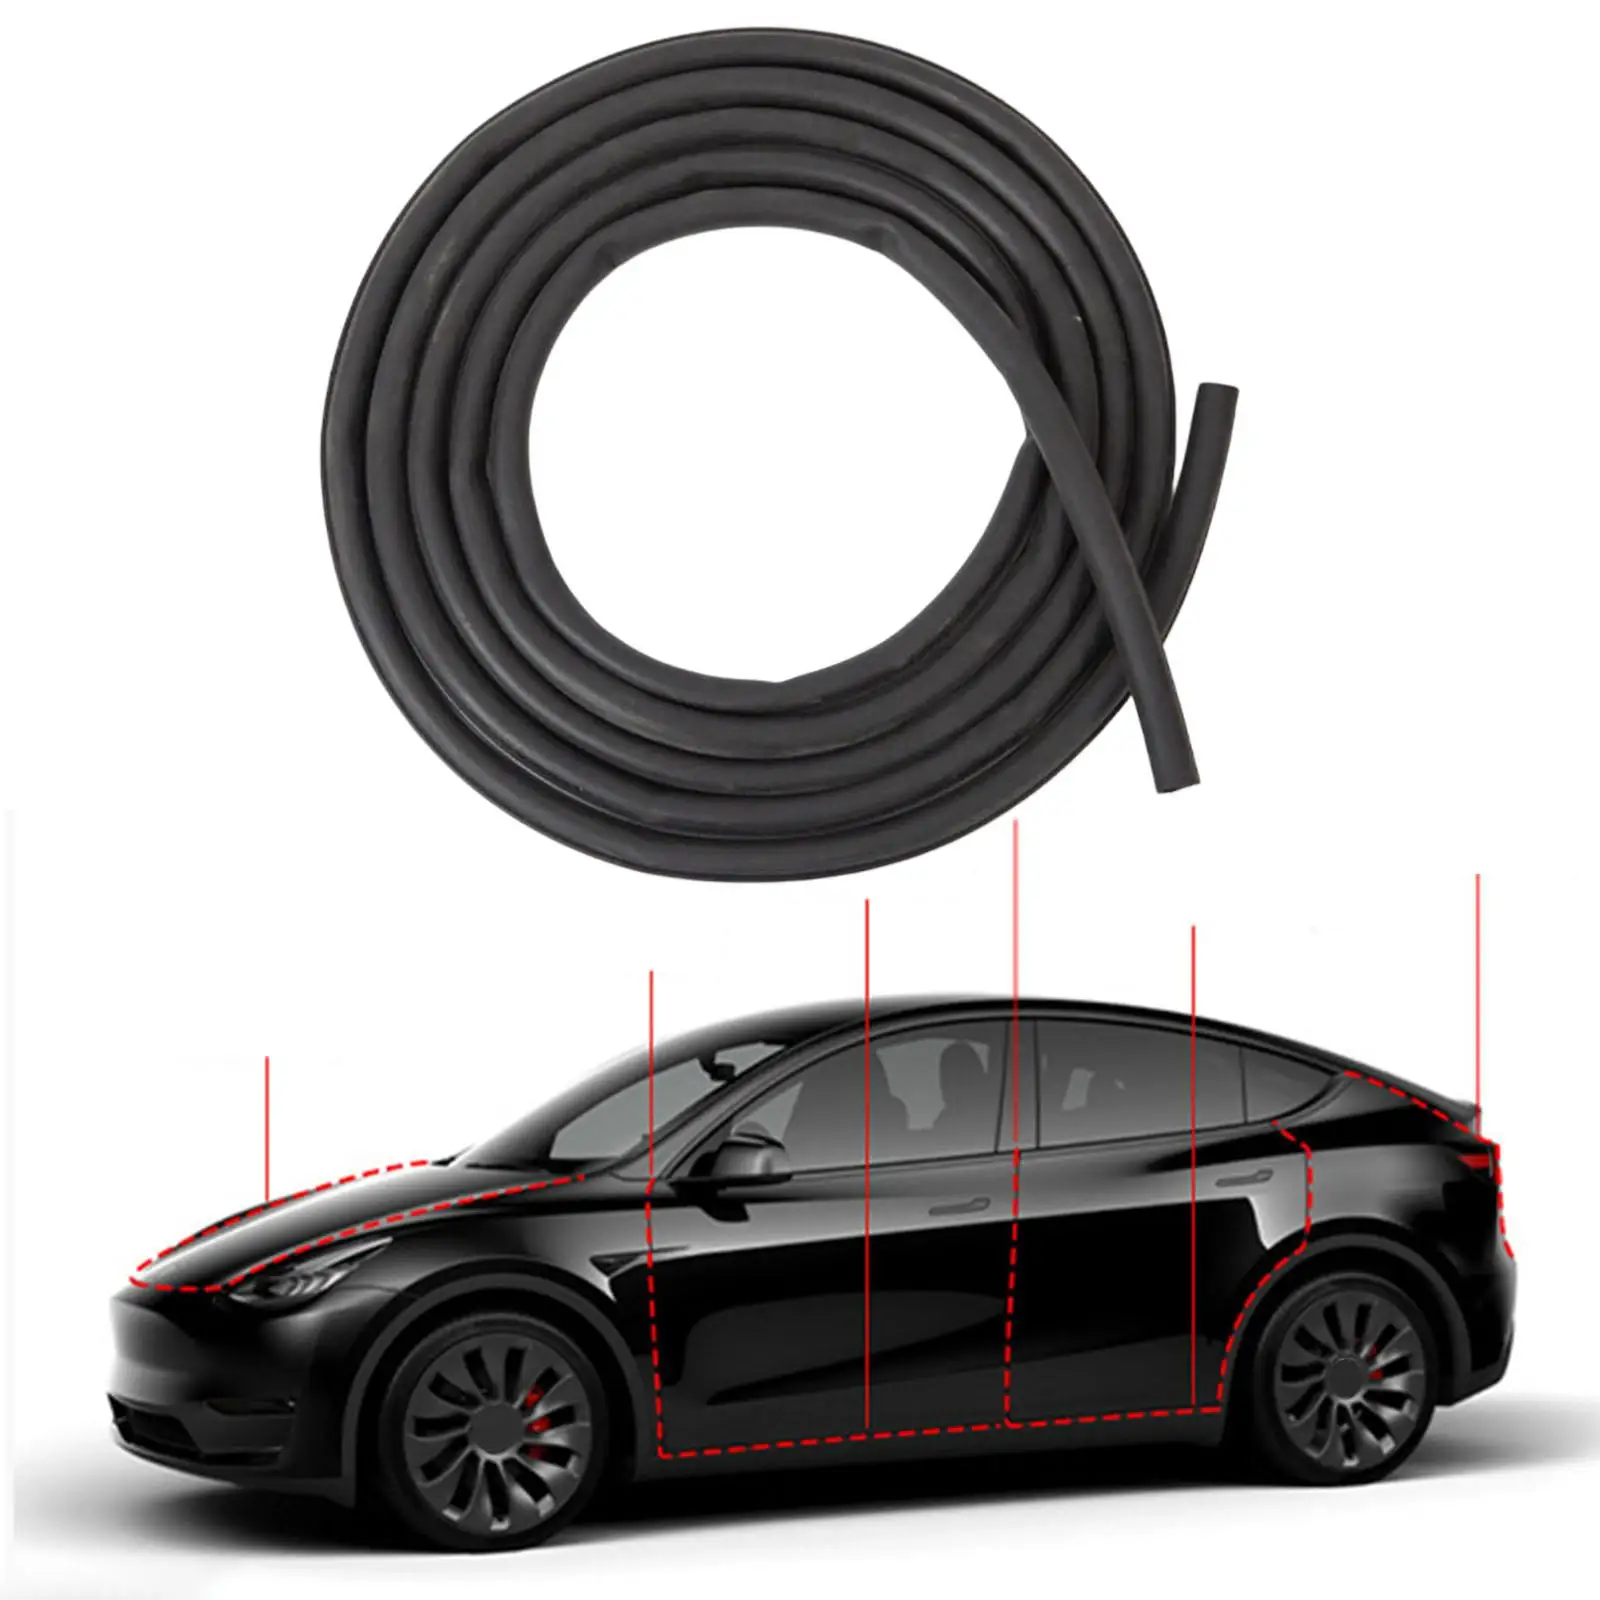 Draft Seal Strip Rubber Weather Draft Seal Noise Reduction Weatherproof Seal Kit Door Seal Kit Soundproof Fit for Model 3/Y